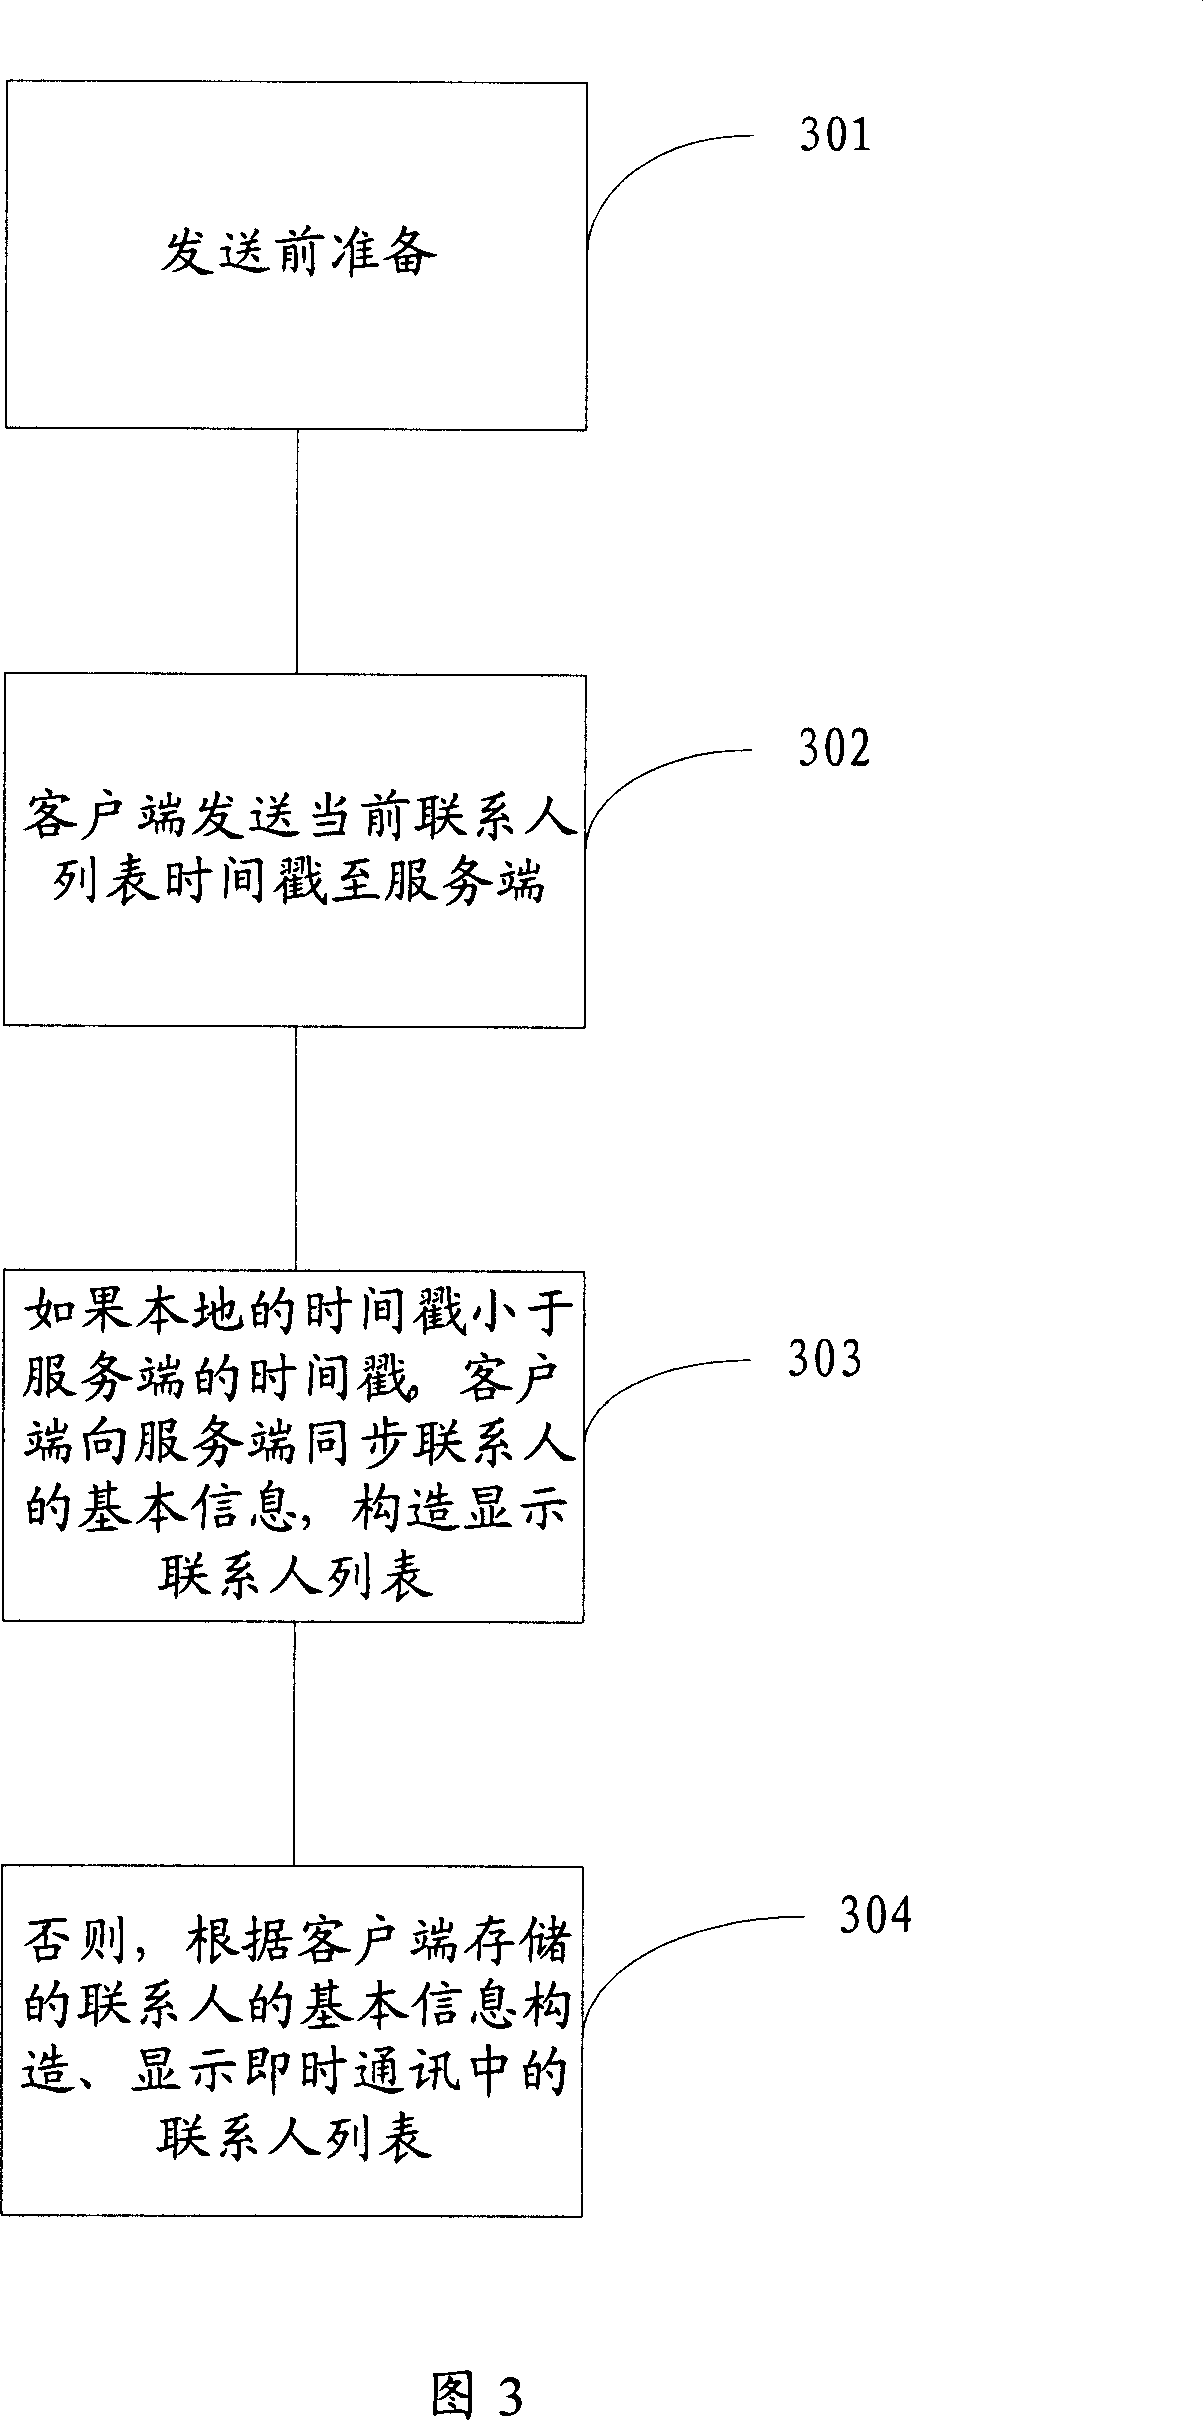 Method for establishing contact list and managing contact information in instant communication